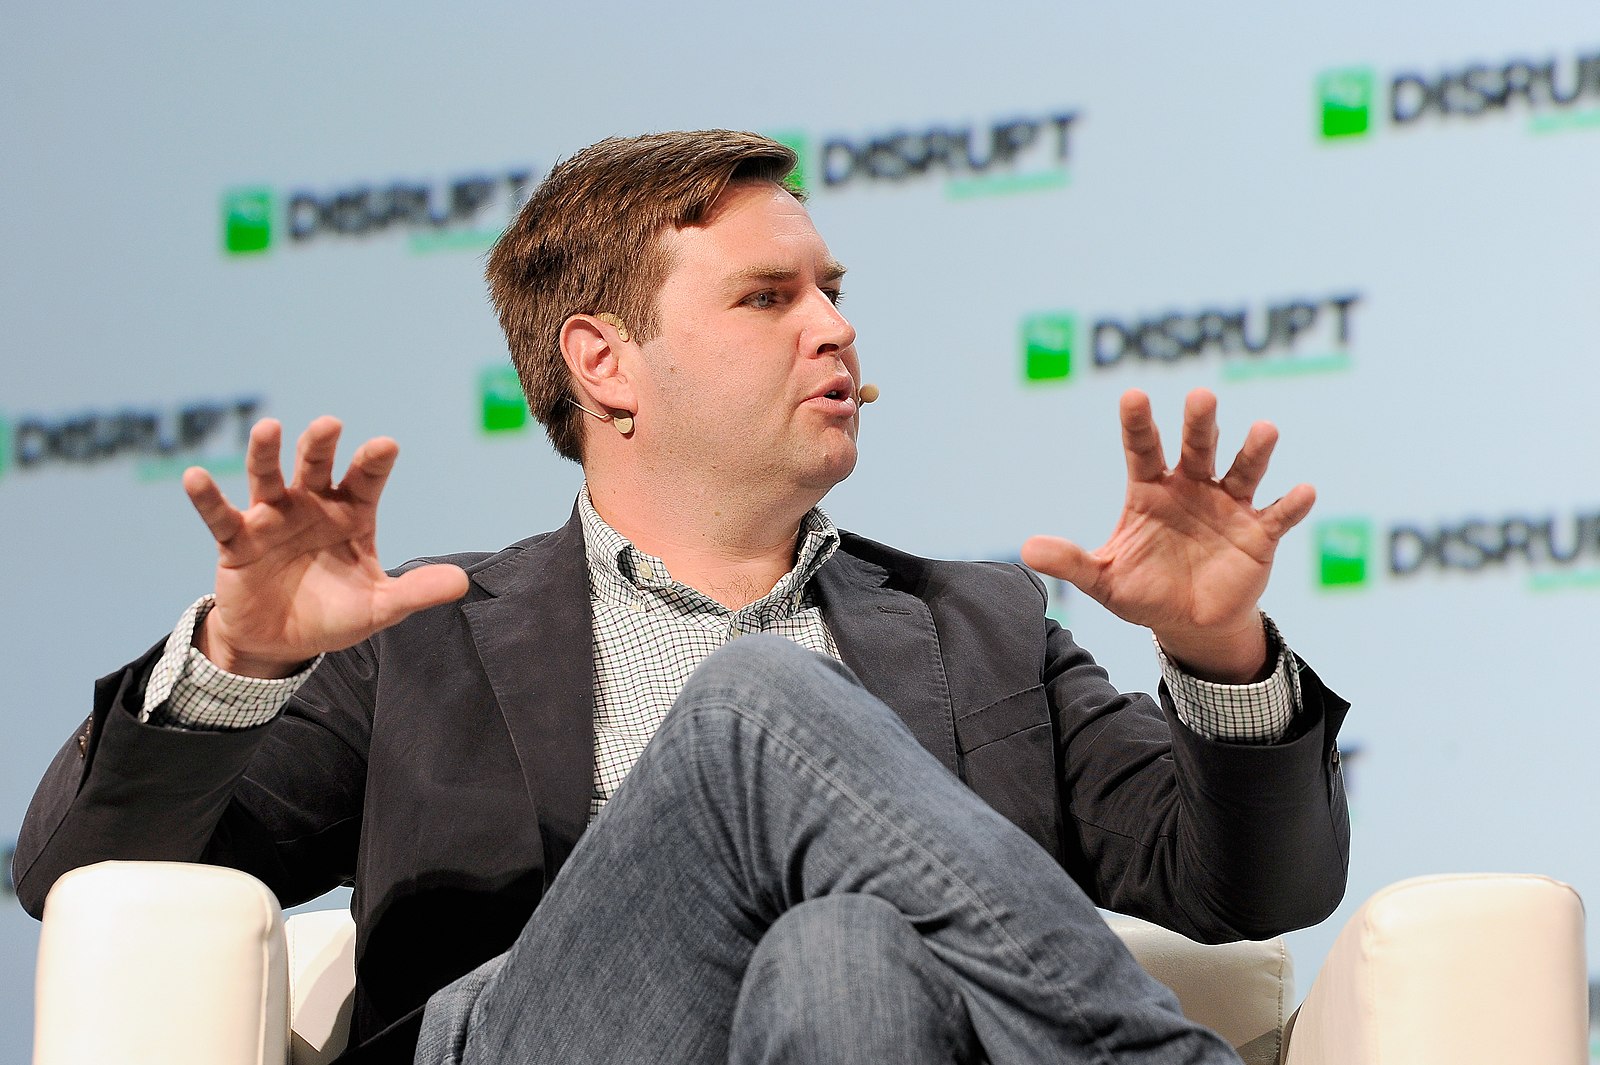 speaks onstage during Day 2 of TechCrunch Disrupt SF 2018 at Moscone Center on September 6, 2018 in San Francisco, California.